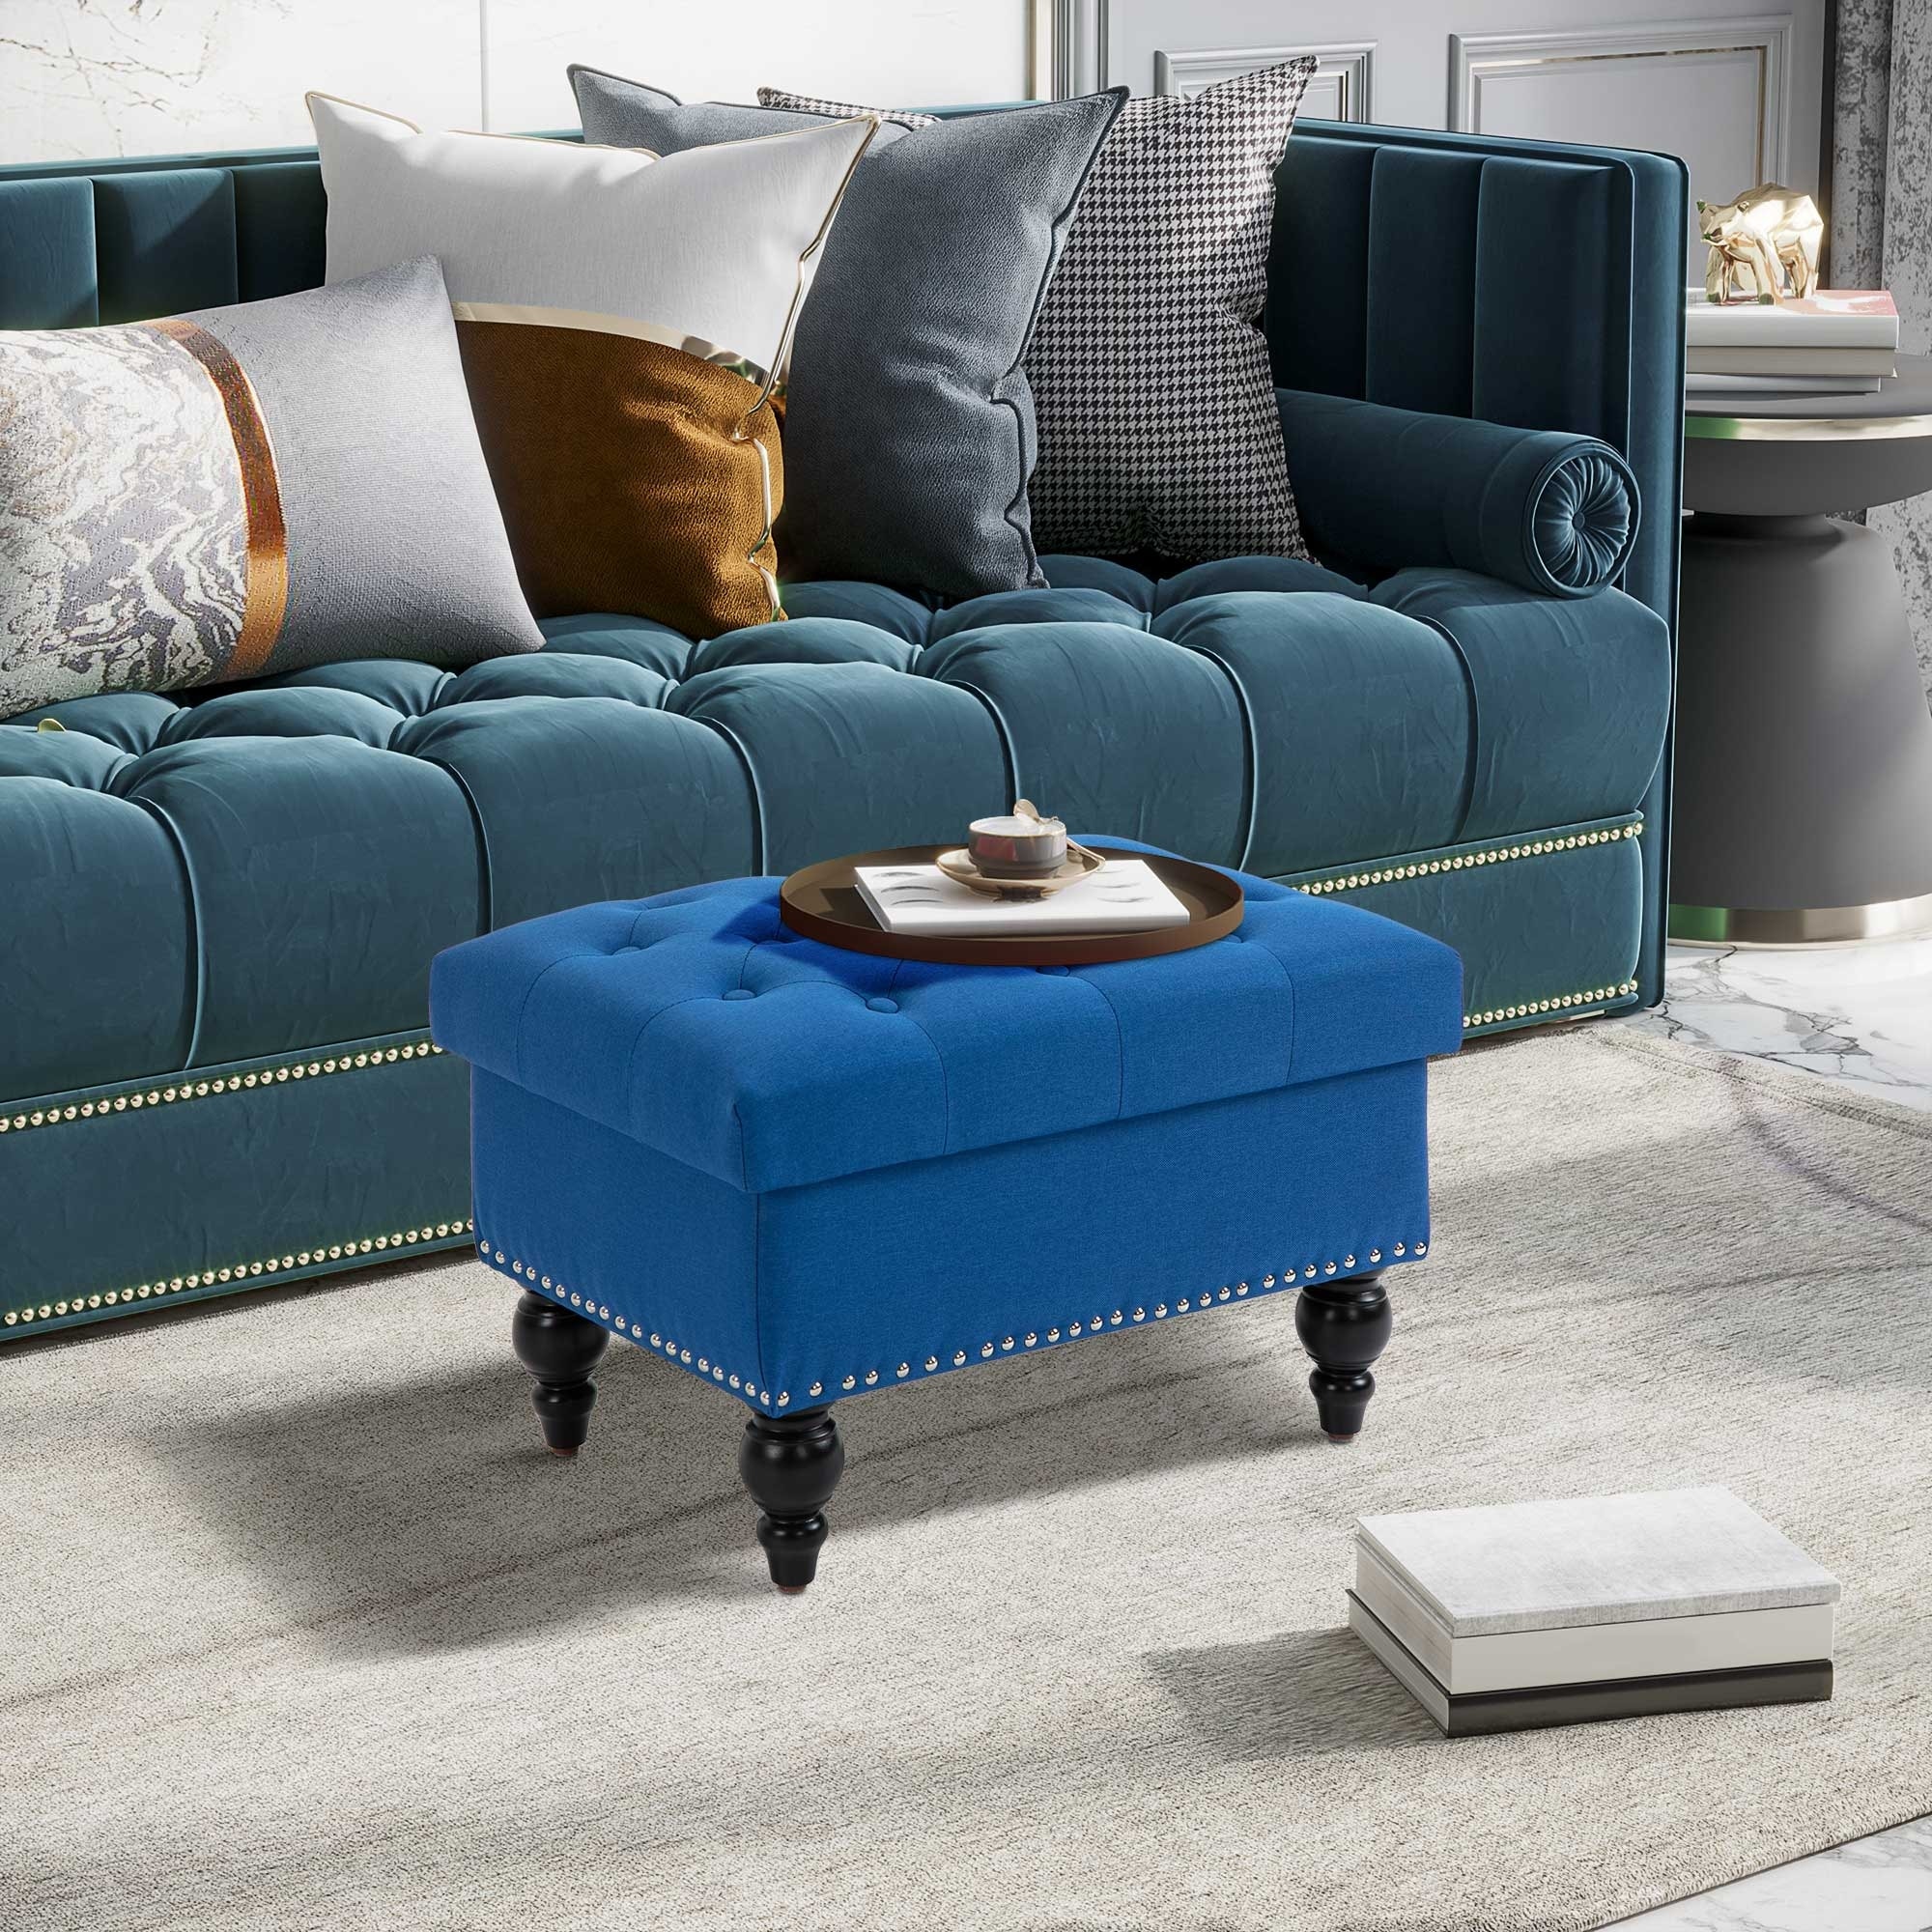 https://ak1.ostkcdn.com/images/products/is/images/direct/c550b06ebfc9a206f2b87a082bc0aec76b33cc2d/HOMCOM-Storage-Ottoman-with-Removable-Lid%2C-Button-Tufted-Fabric-Bench-for-Footrest-and-Seat-with-Wood-Legs%2C-Blue.jpg